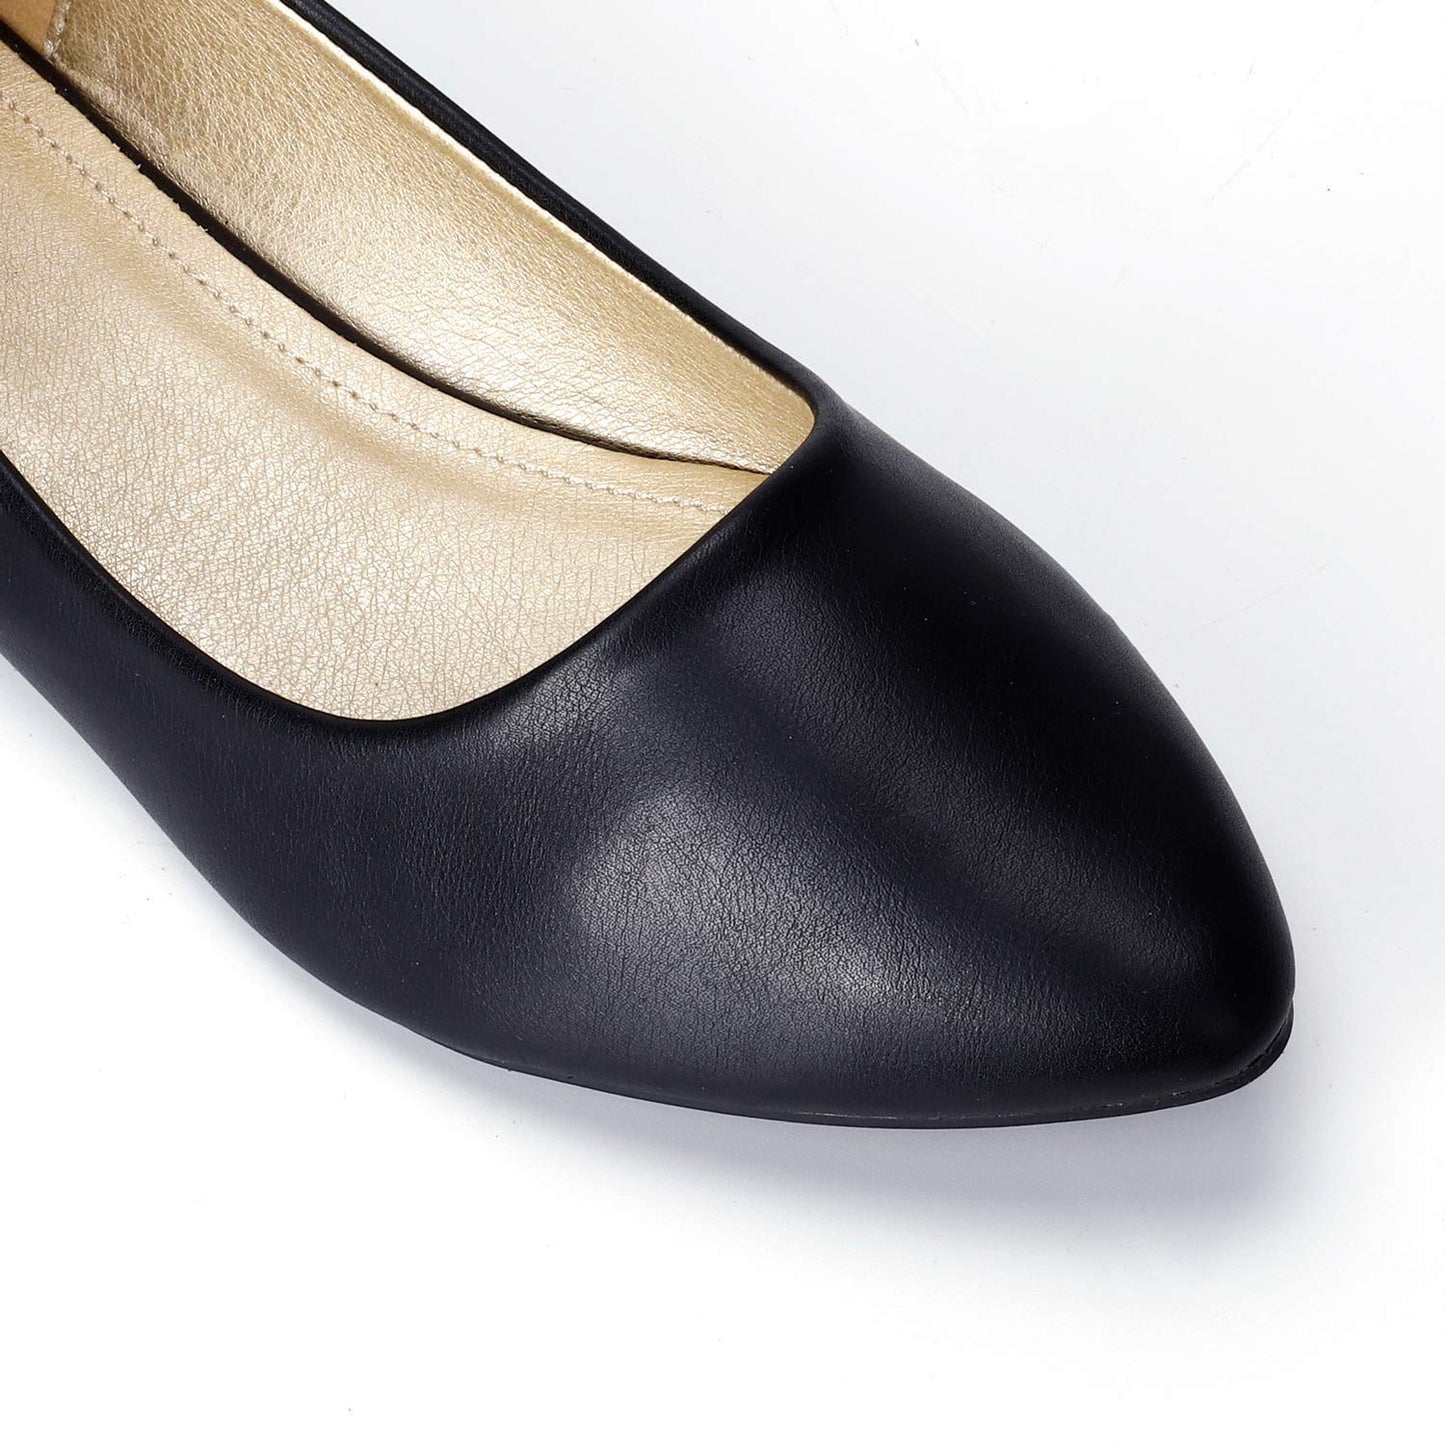 Casual Pointed Toe Ballet Flats with Tassel